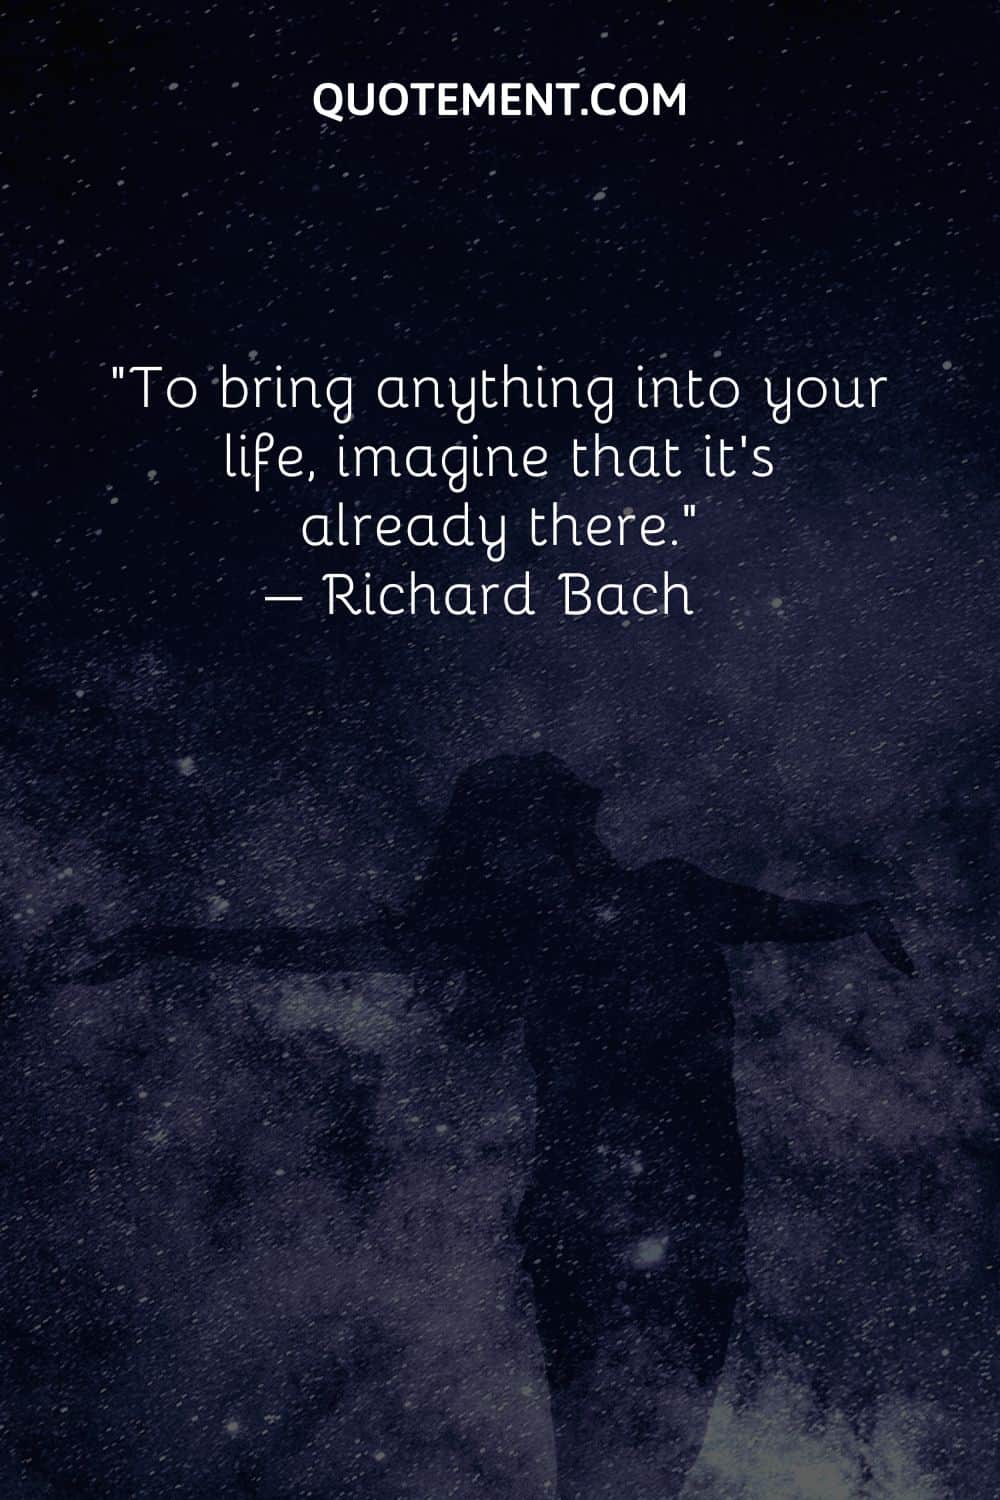 To bring anything into your life, imagine that it’s already there